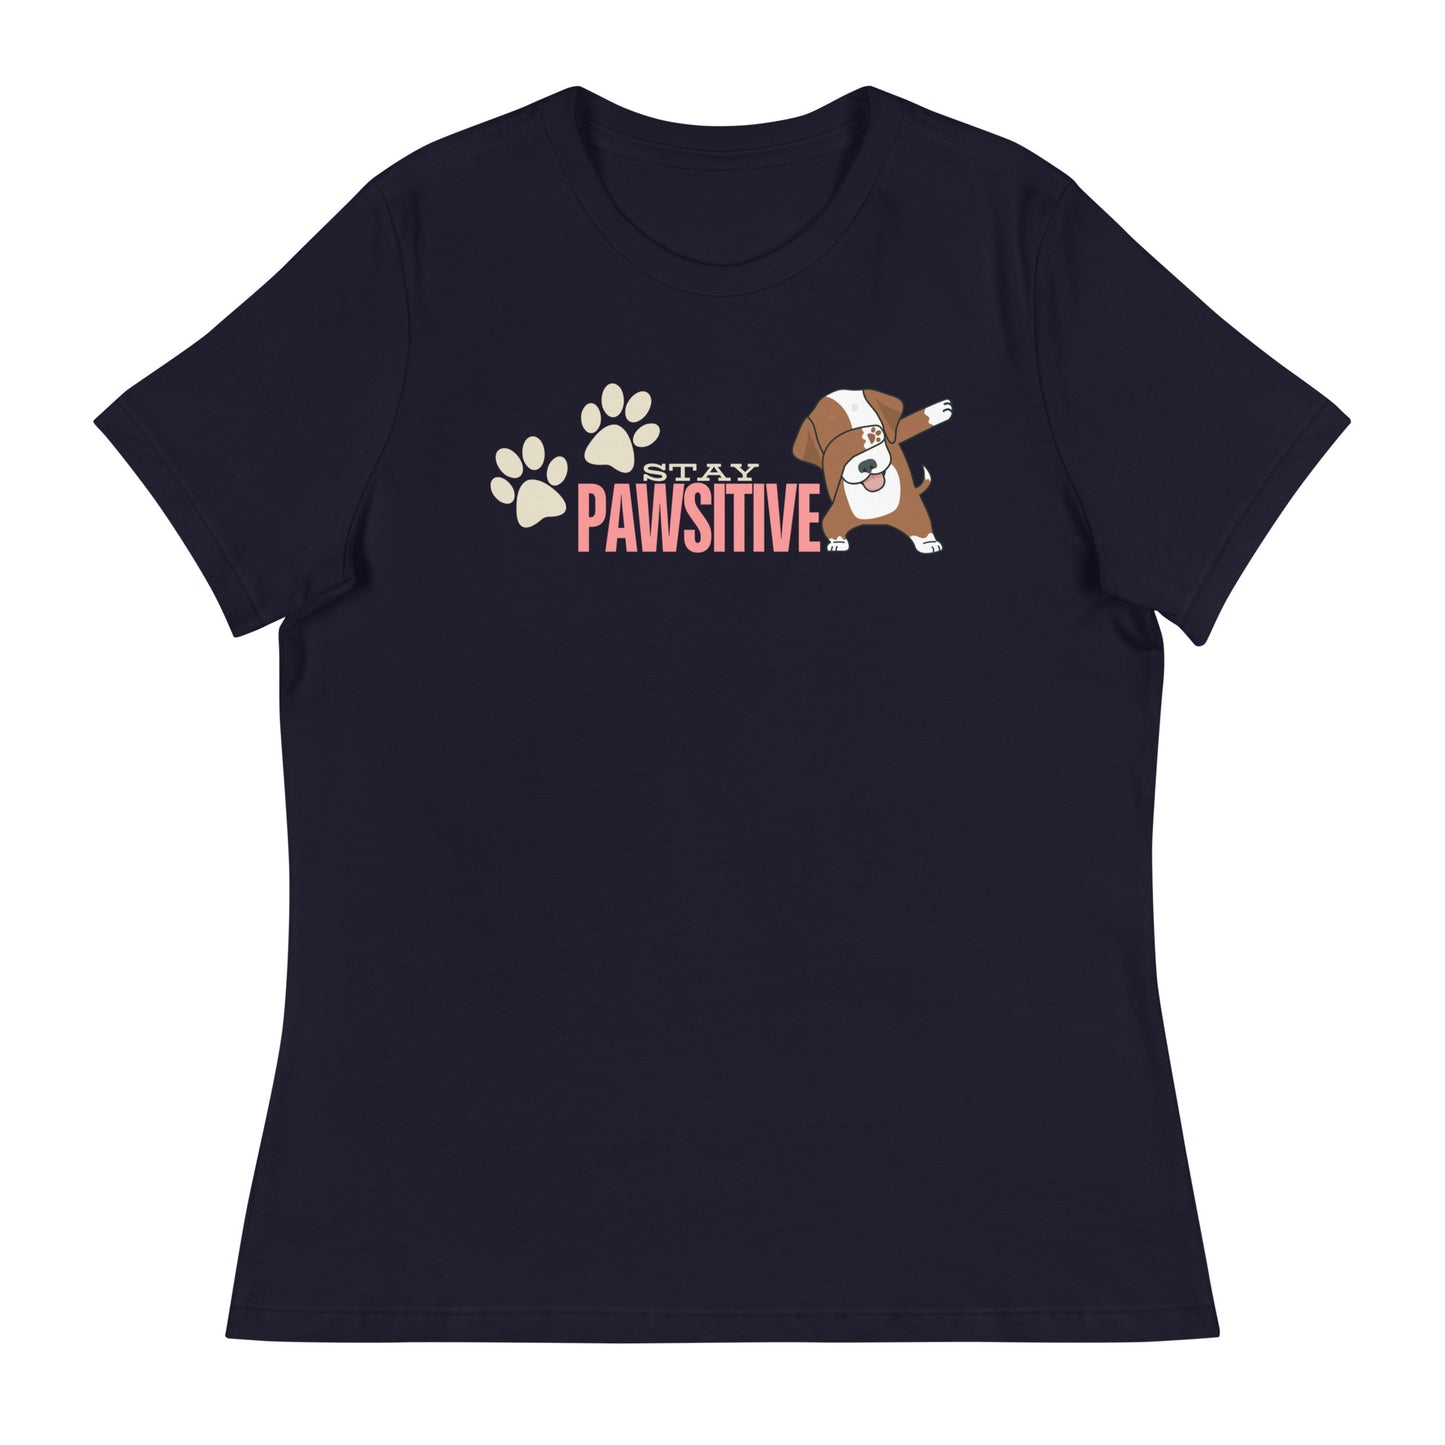 Stay Pawsitive! Women's Relaxed T-Shirt